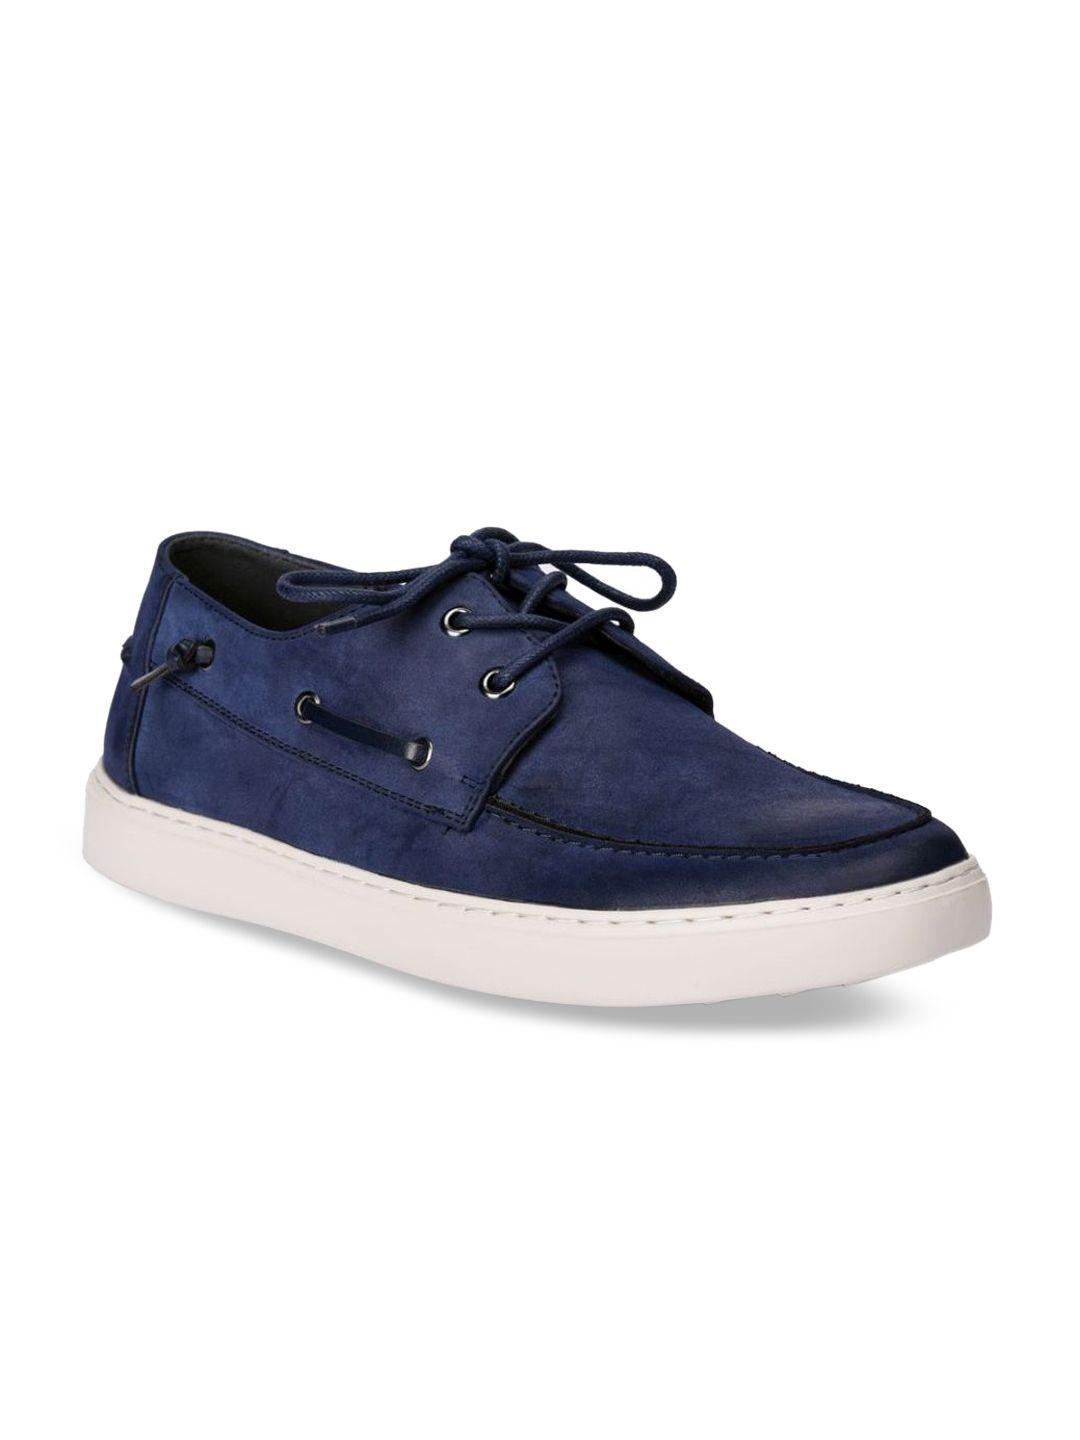 kenneth cole men navy blue lightweight classic leather boat sneakers